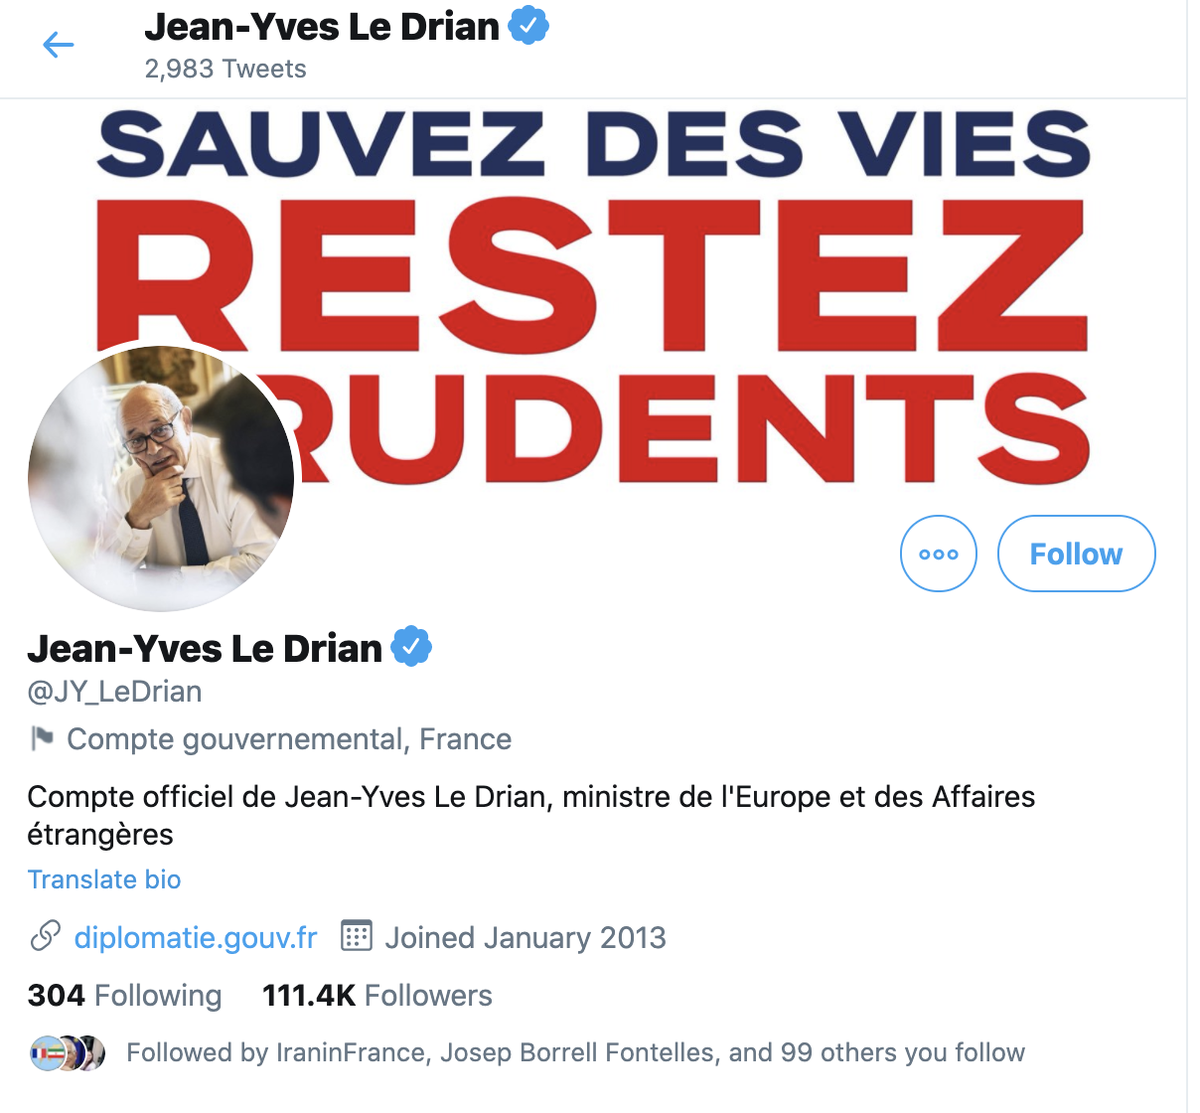 Same issue here with French government accounts. President Macron's personal account  @EmmanuelMacron has not been labelled. But  @Elysee, foreign minister  @JY_LeDrian and prime minister  @JeanCASTEX have all been labelled